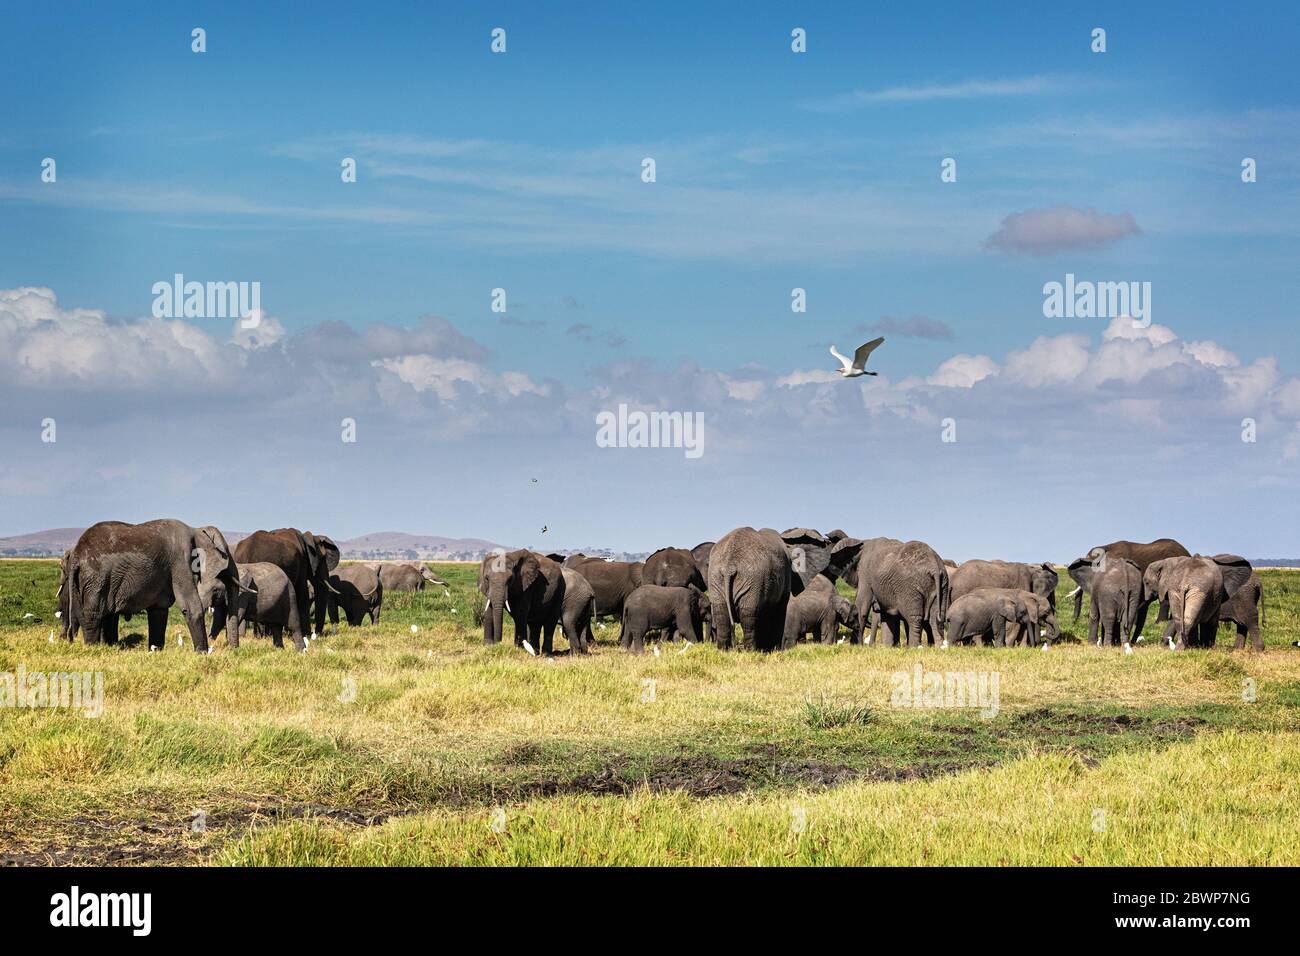 Large herd of African elephants together grazing on grass on the open landscape of Amboseli, Kenya Africa Stock Photo